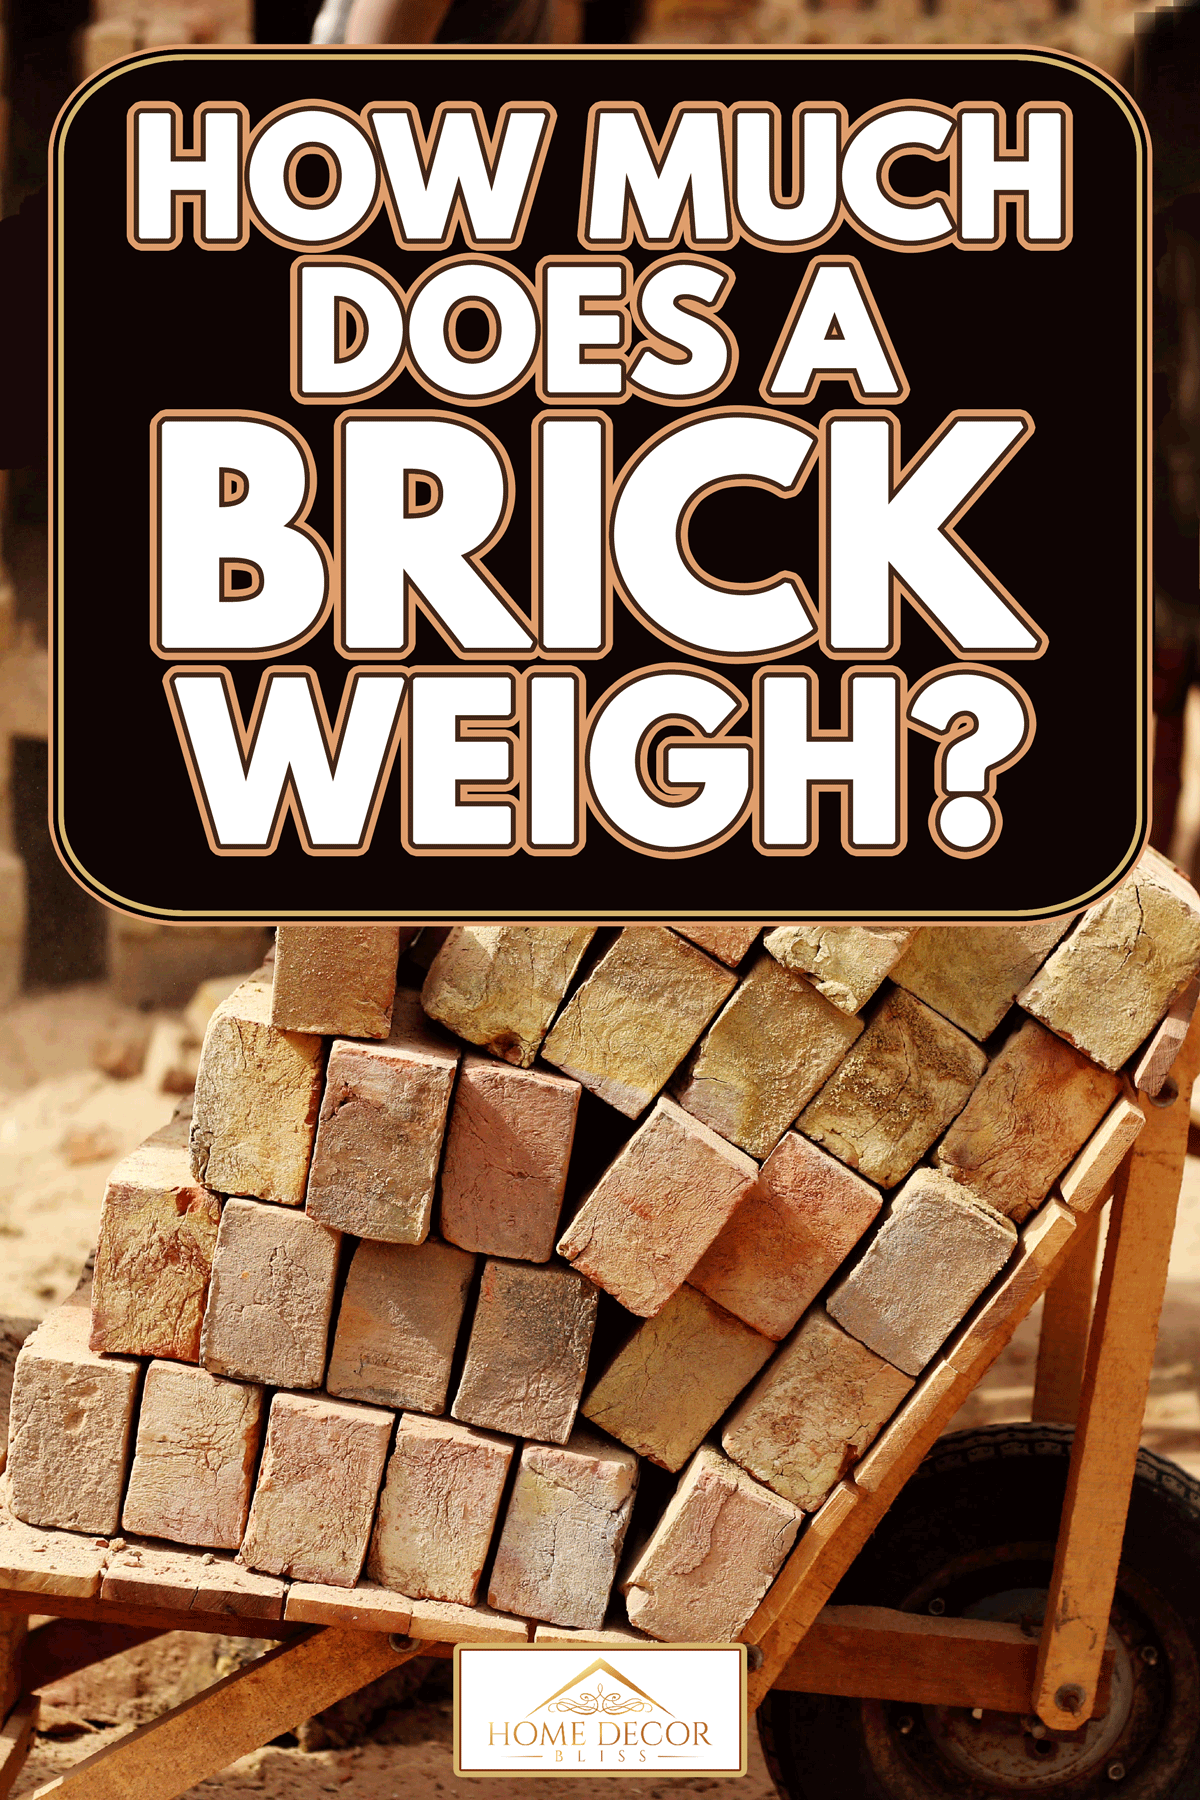 Loading a brick in cart in the brick factory, How Much Does A Brick Weigh?